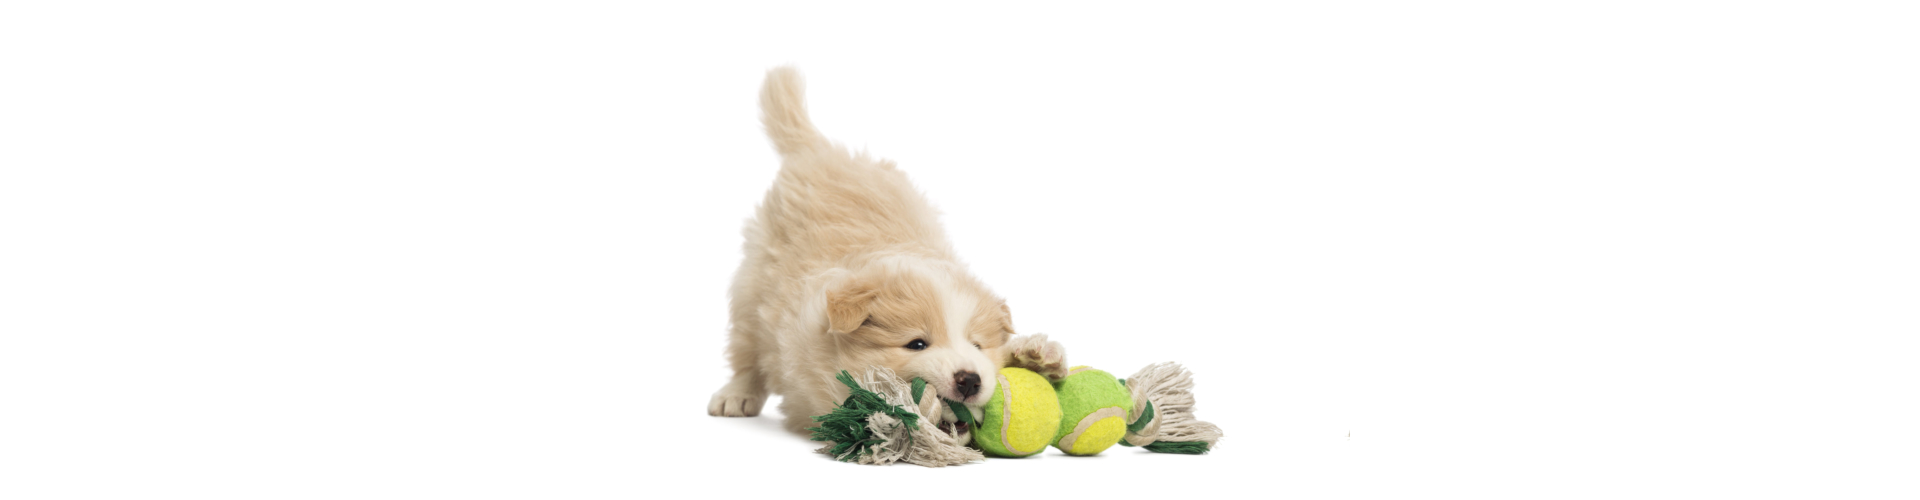 Border Collie puppy, 6 weeks old, playing with a dog toy in front of white background